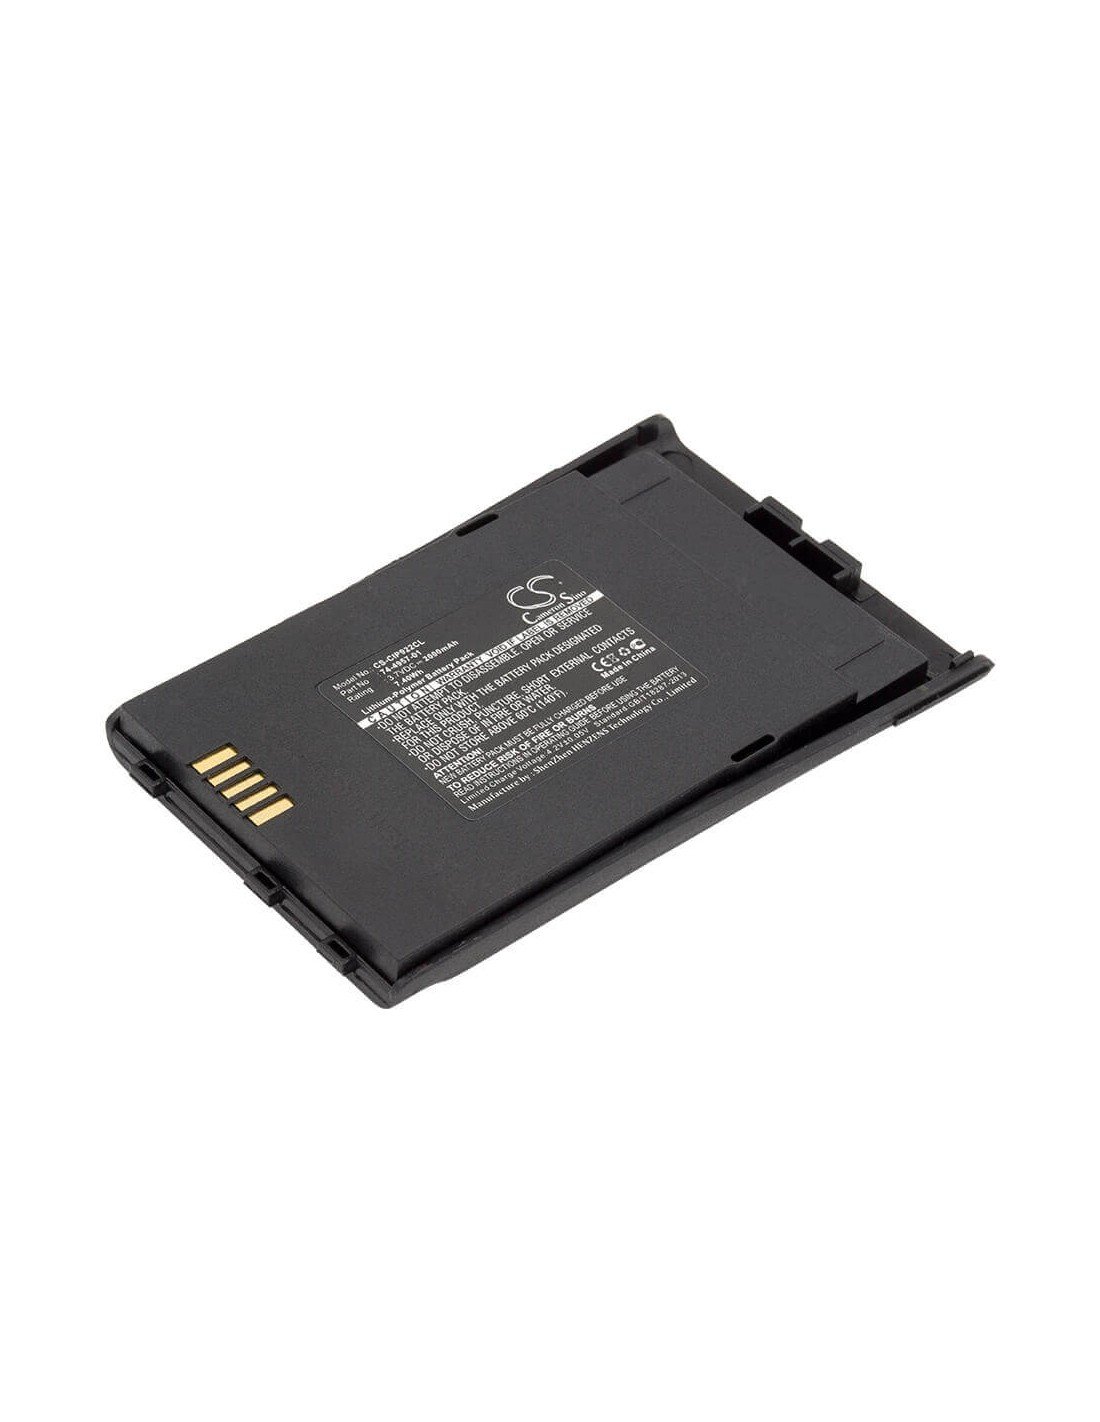 Battery for Cisco Cp-7921, Cp-7921g, Cp-7921g Unified 3.7V, 2500mAh - 9.25Wh